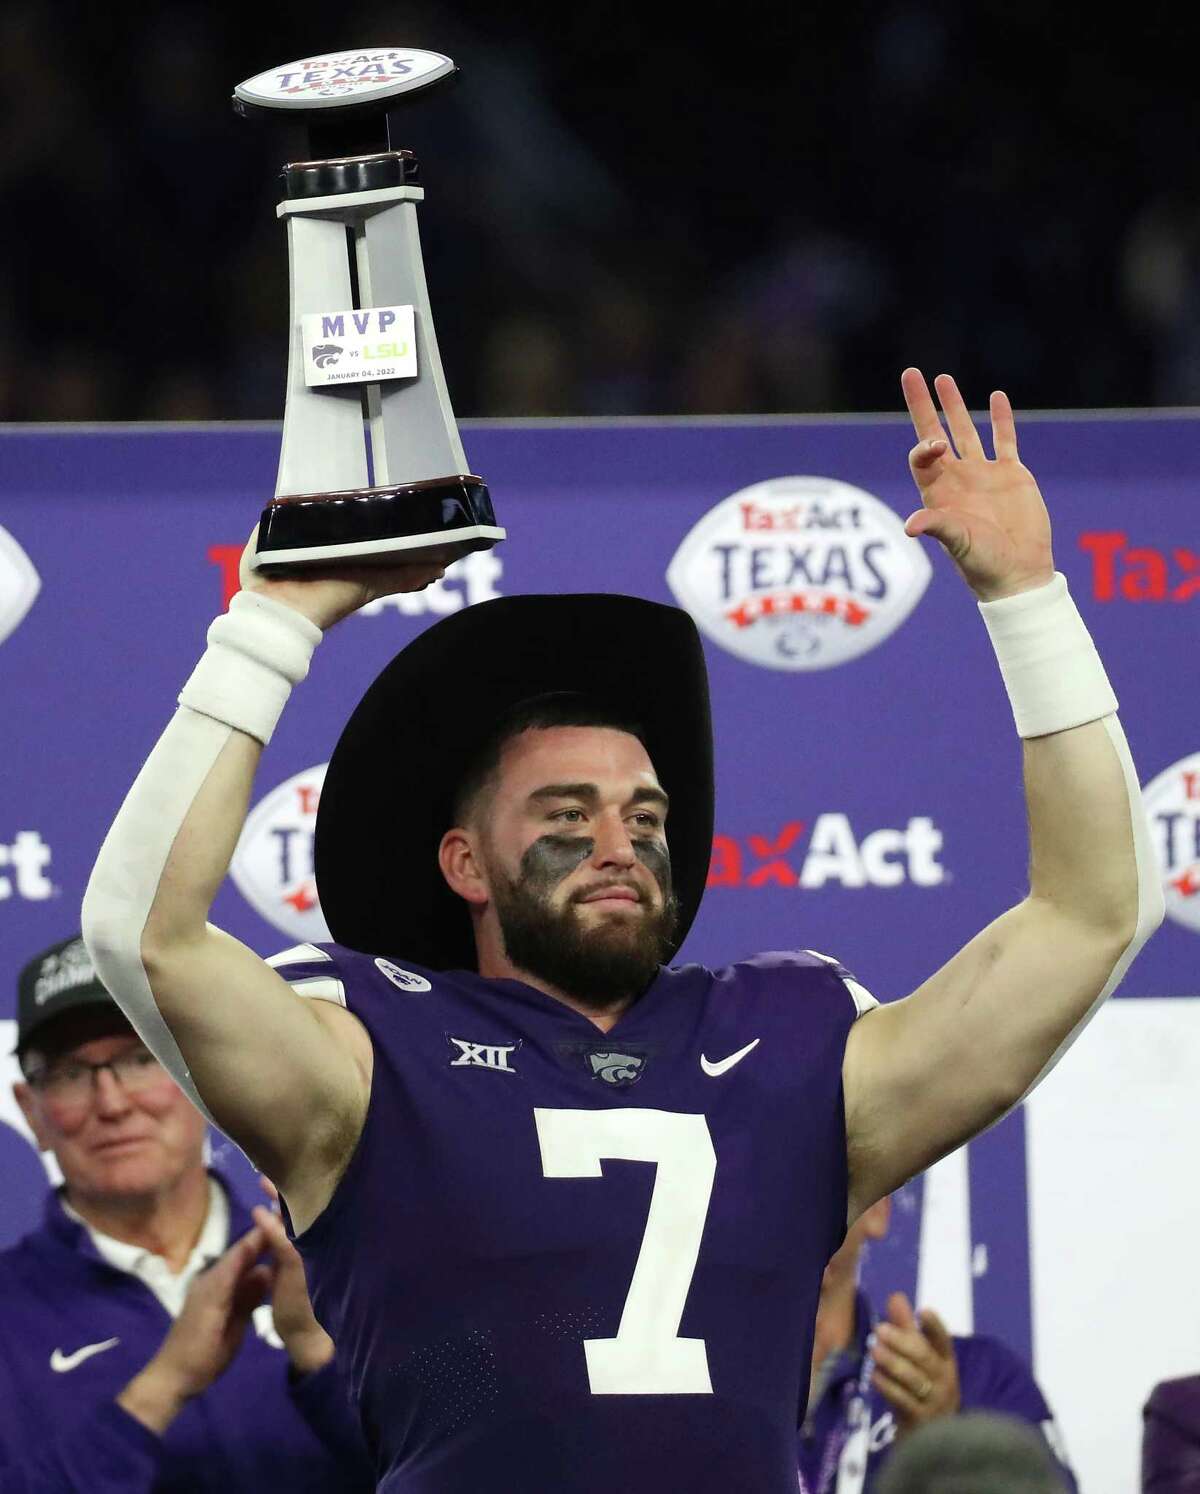 Kansas State quarterback Skylar Thompson dons the MVP cowboy hat and holds up the trophy after he lead the Wildcats to a 42-20 win over LSU in the TaxAct Texas Bowl Tuesday, Jan. 4, 2022, in Houston.